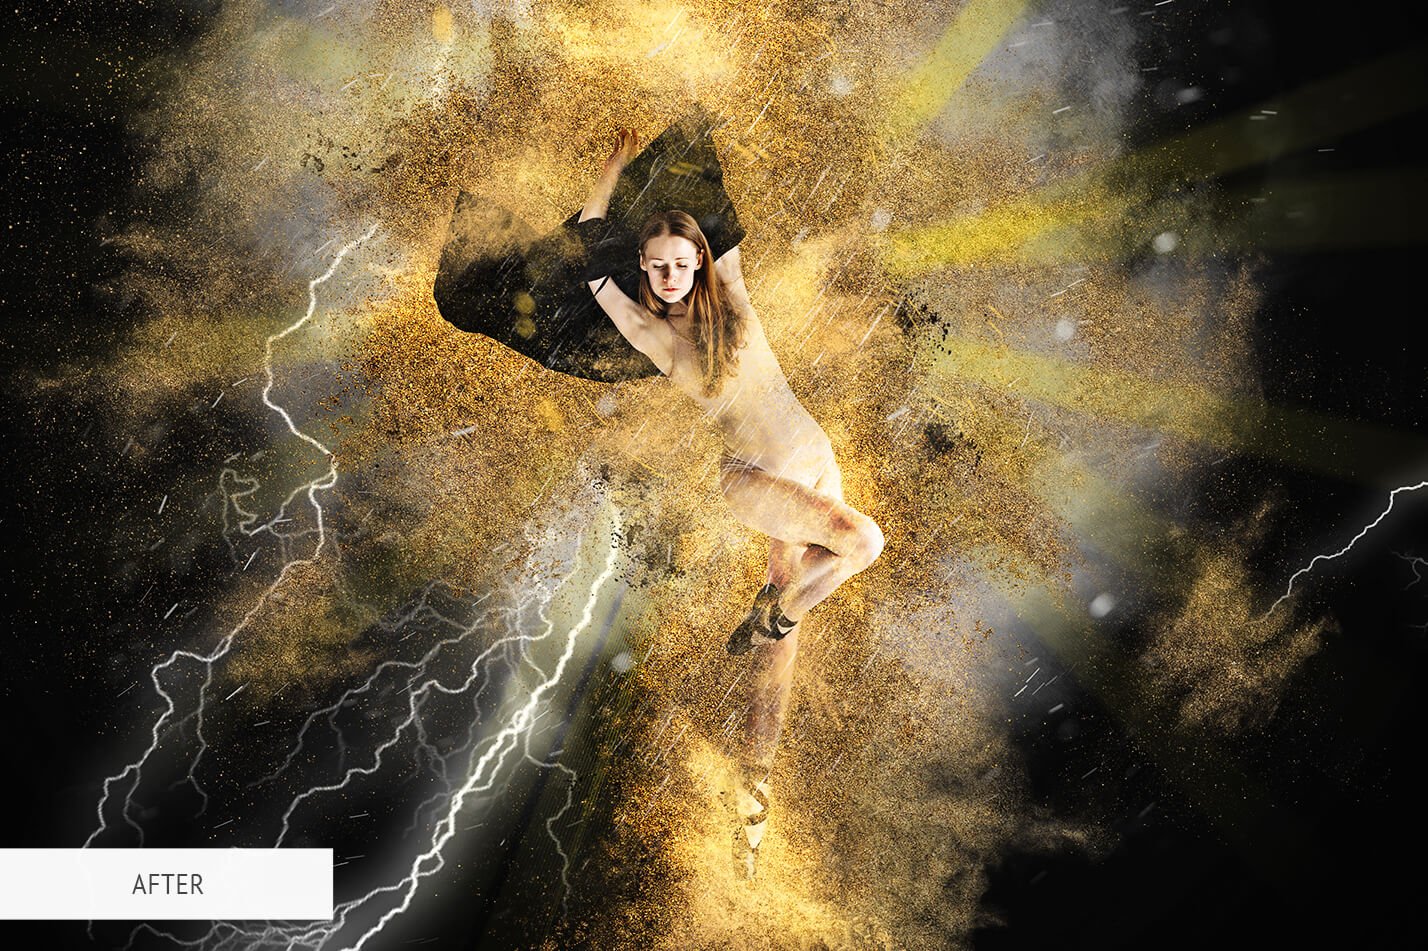 Photoshop Actions - Sand Stormpreview image.